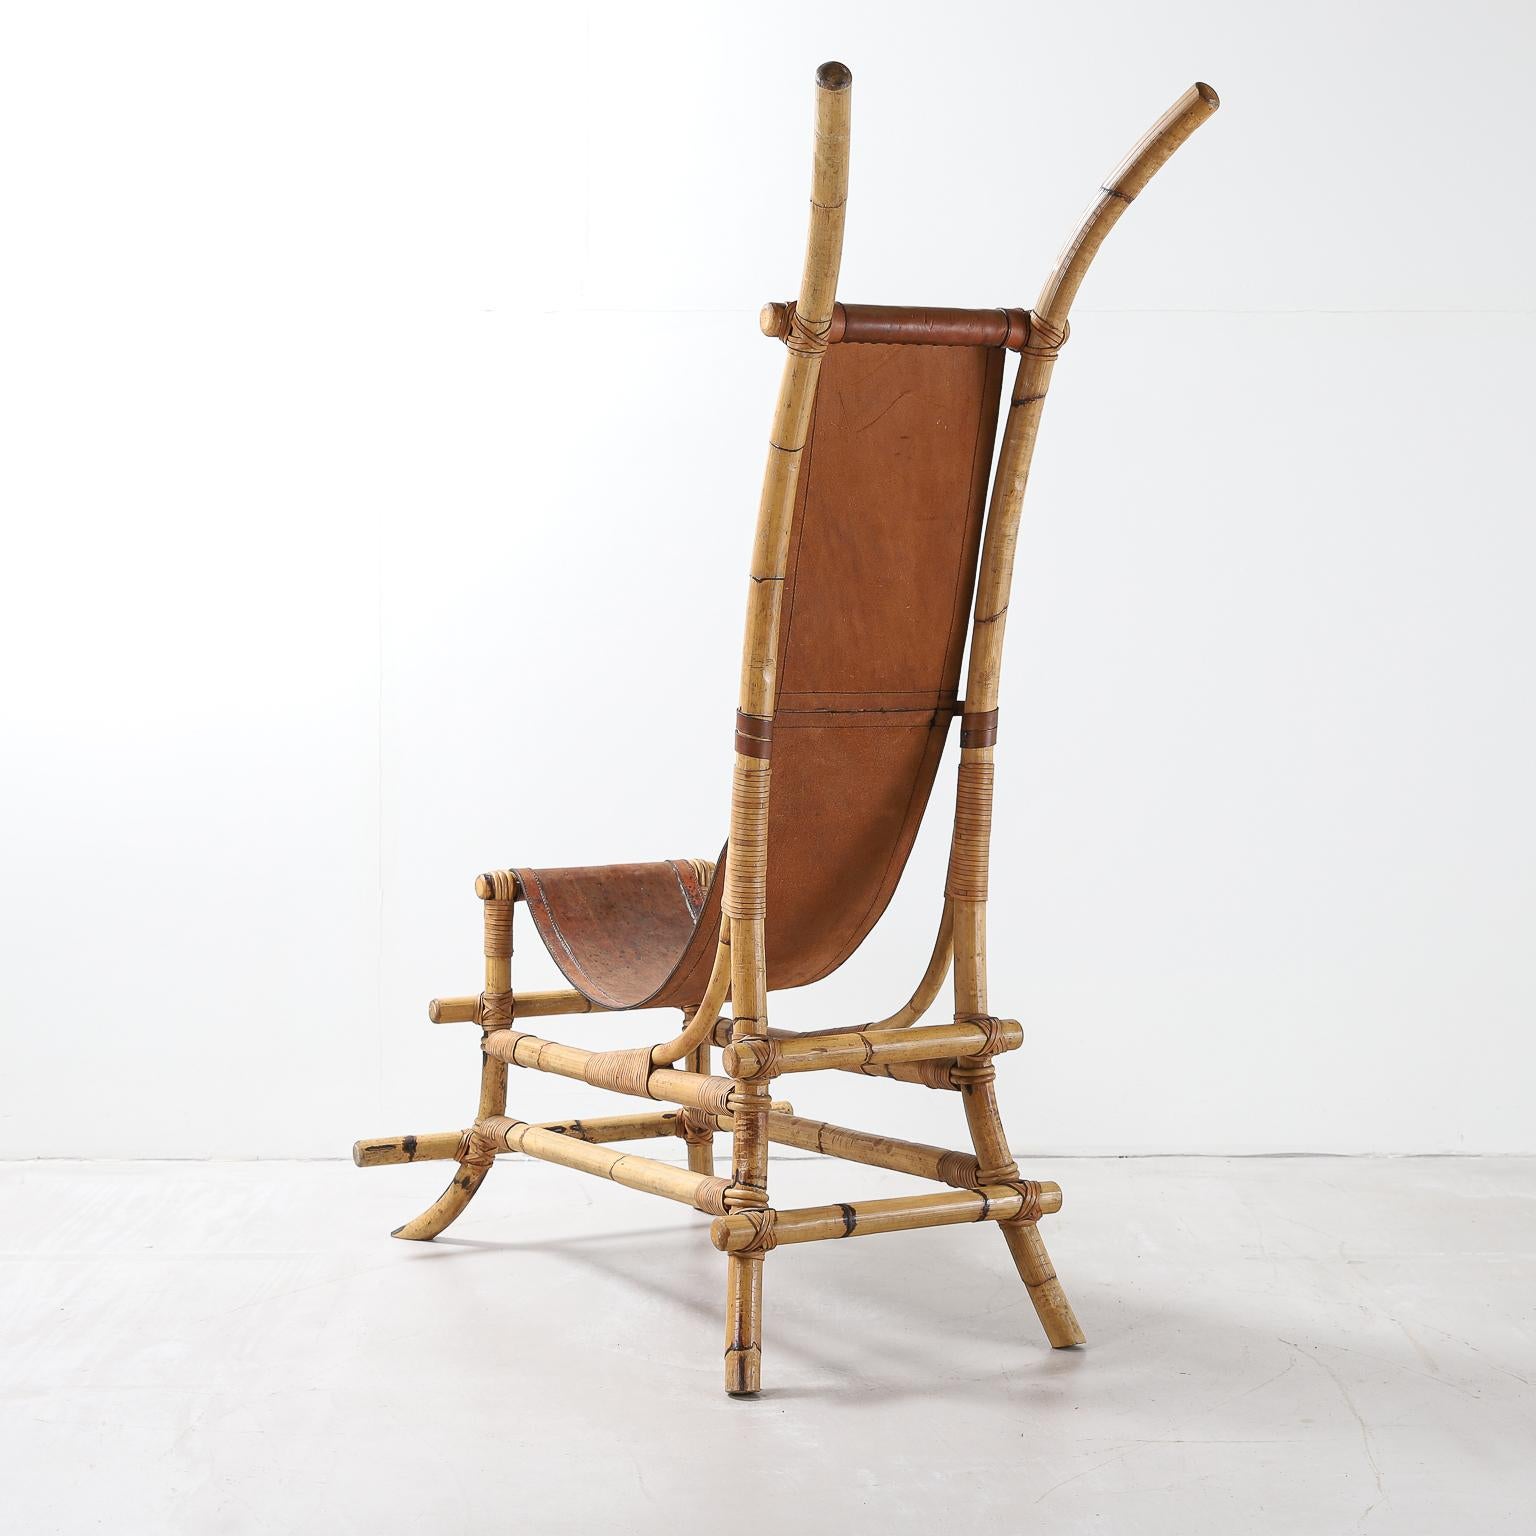 Italian 1970s Bamboo and Leather Sculptural Chair In Good Condition For Sale In London, Charterhouse Square